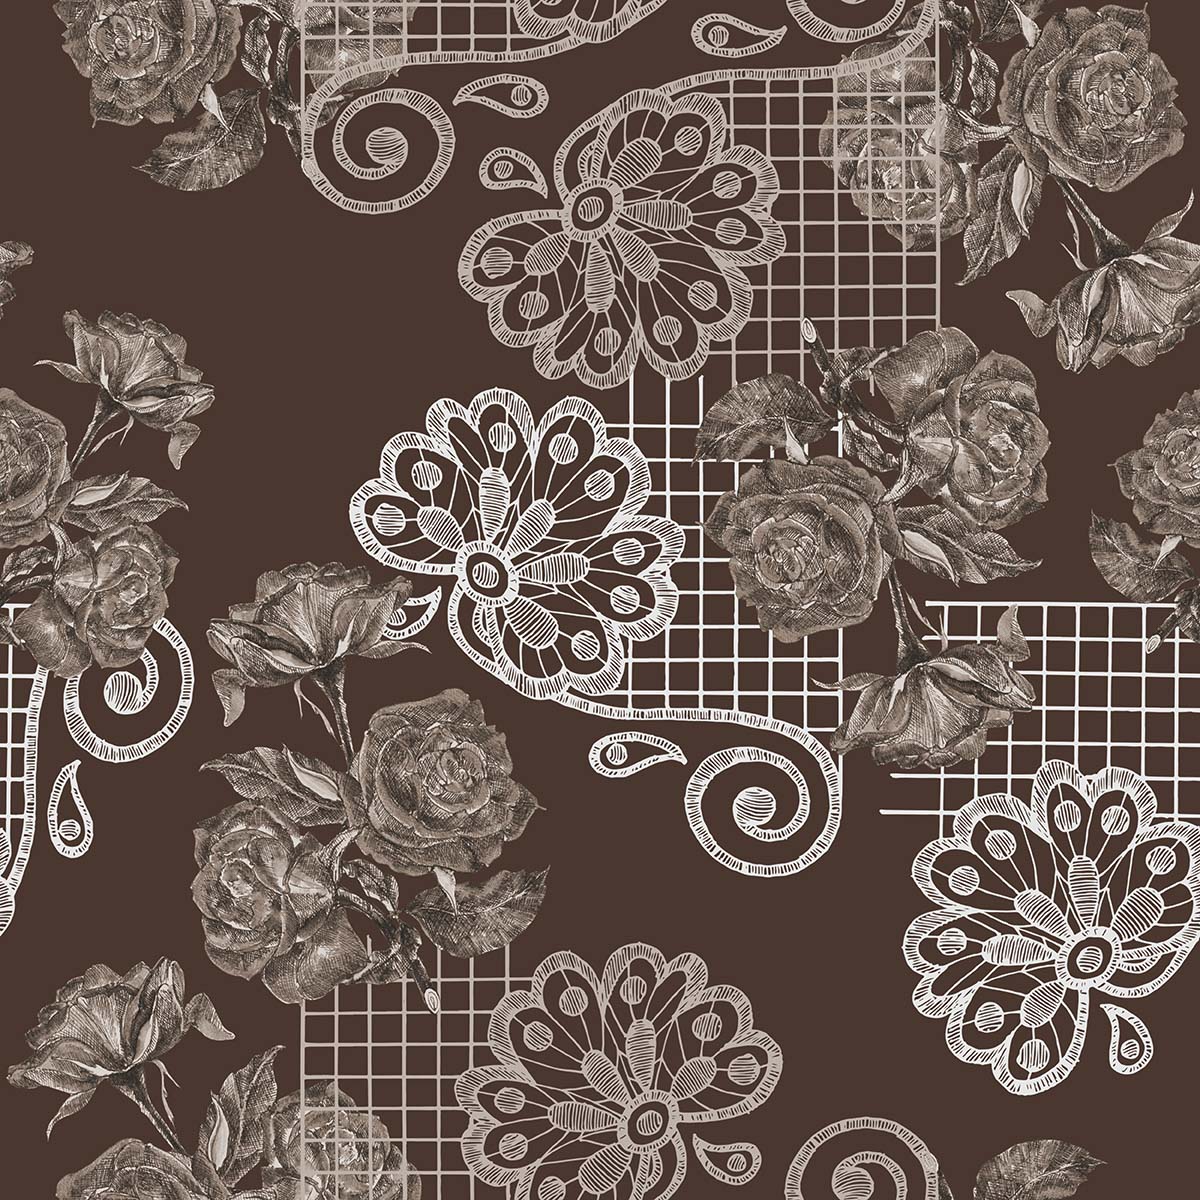 A brown and white floral pattern